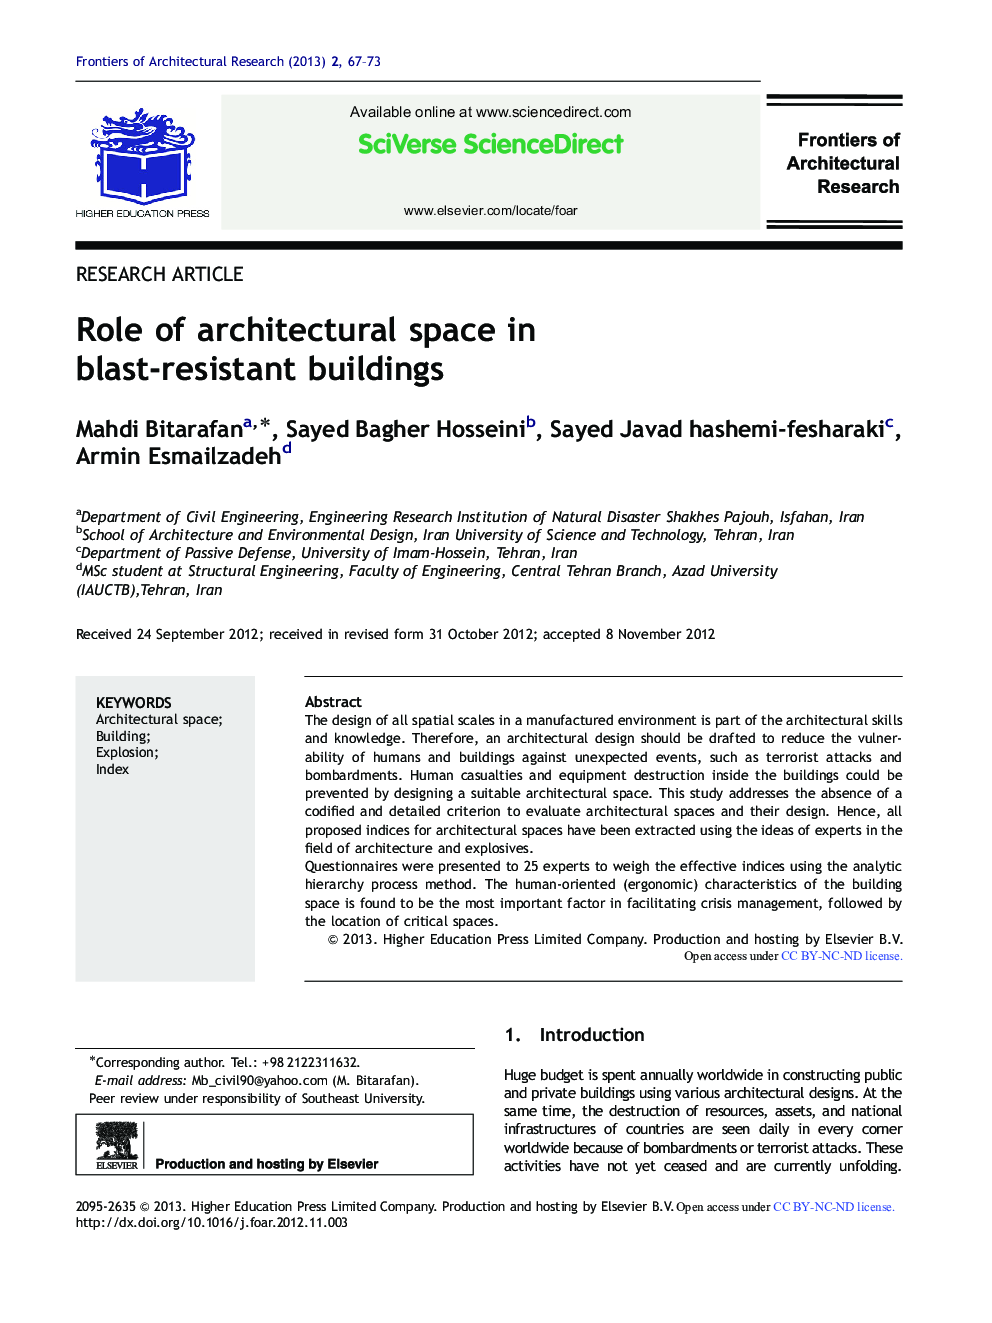 Role of architectural space in blast-resistant buildings 